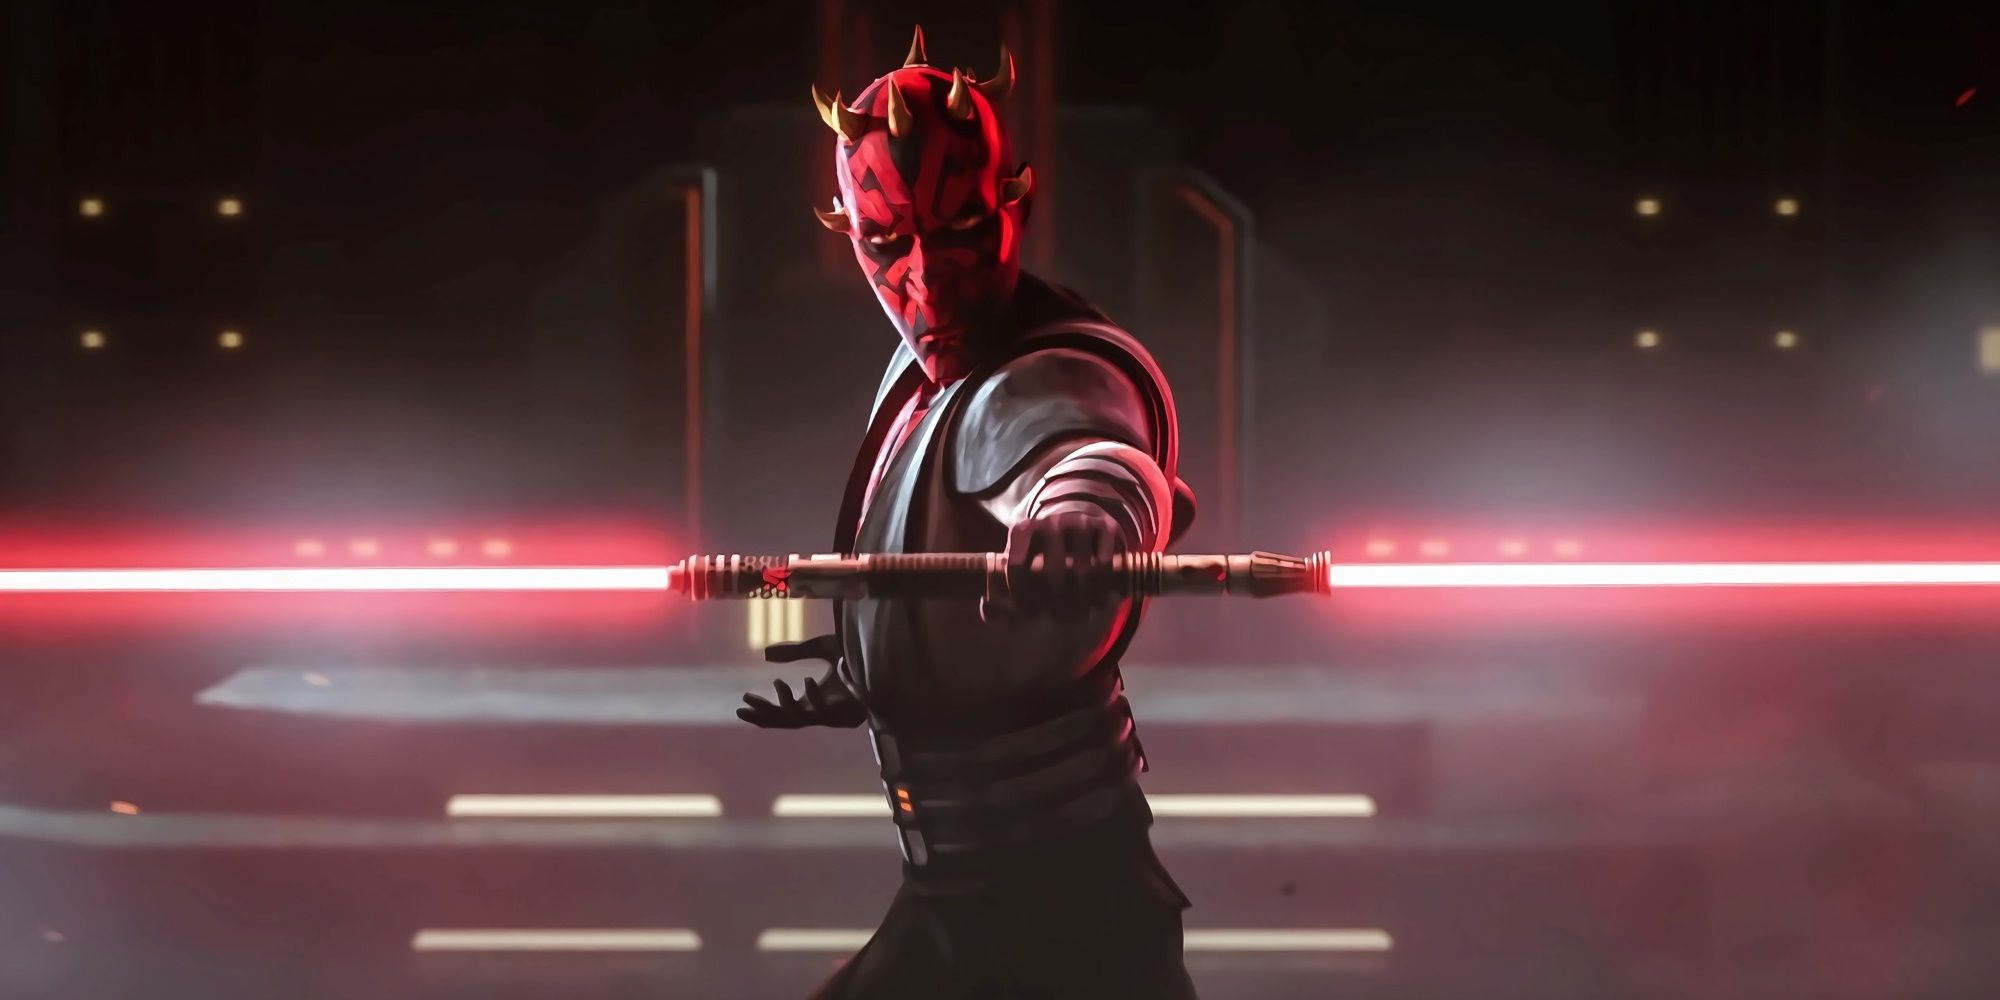 Darth Maul stands ready to fight with his duel bladed lightsaber ignited